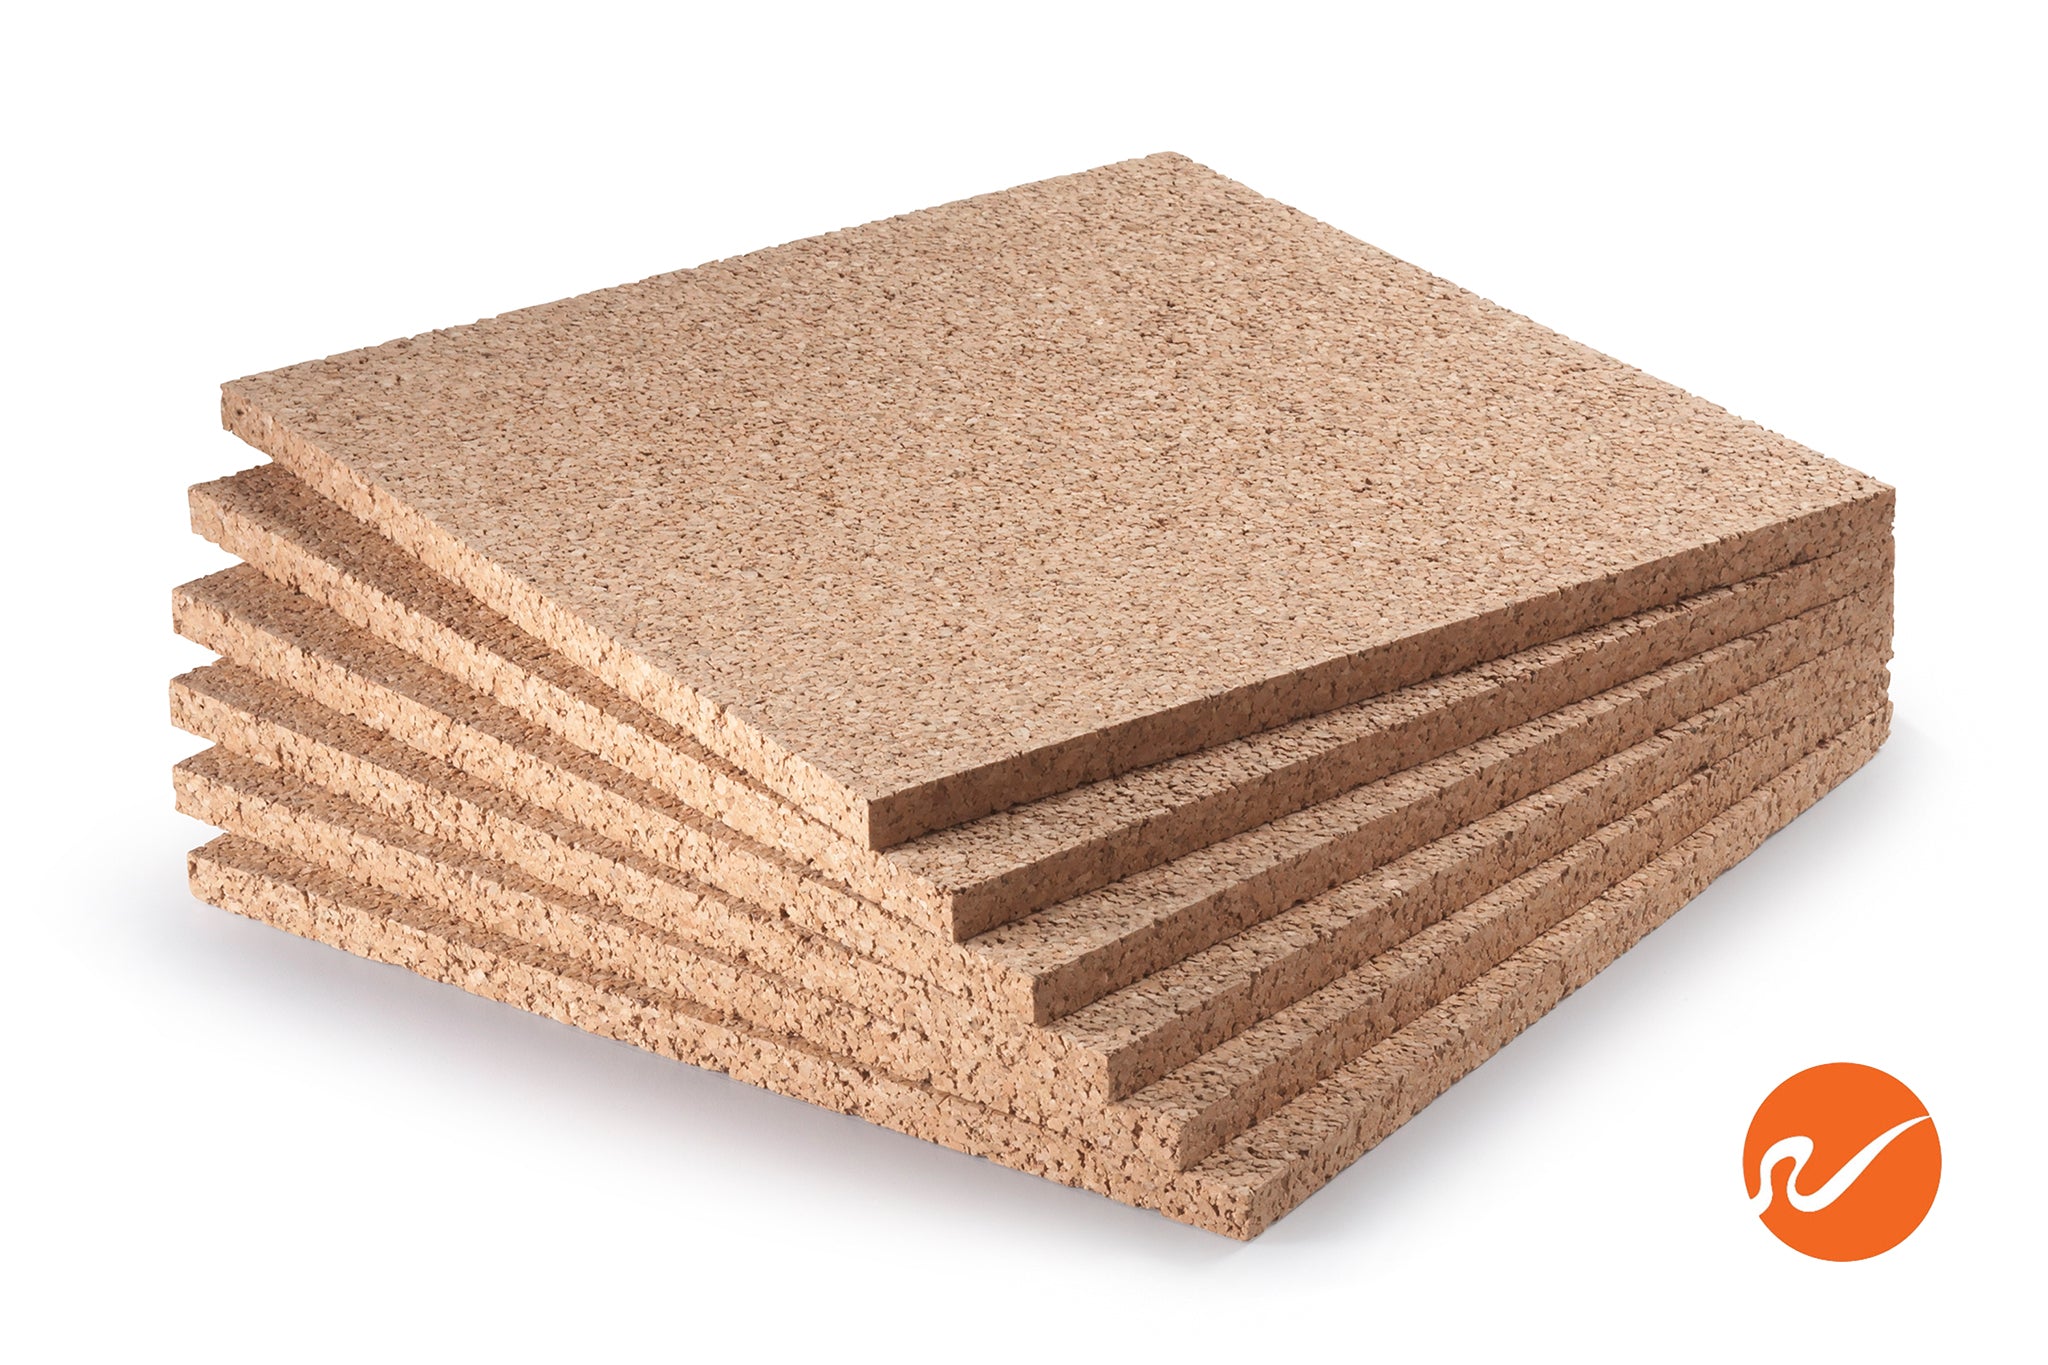 50 Pack Self Adhesive Cork Squares, 6 X 6 Inches Cork Backing for